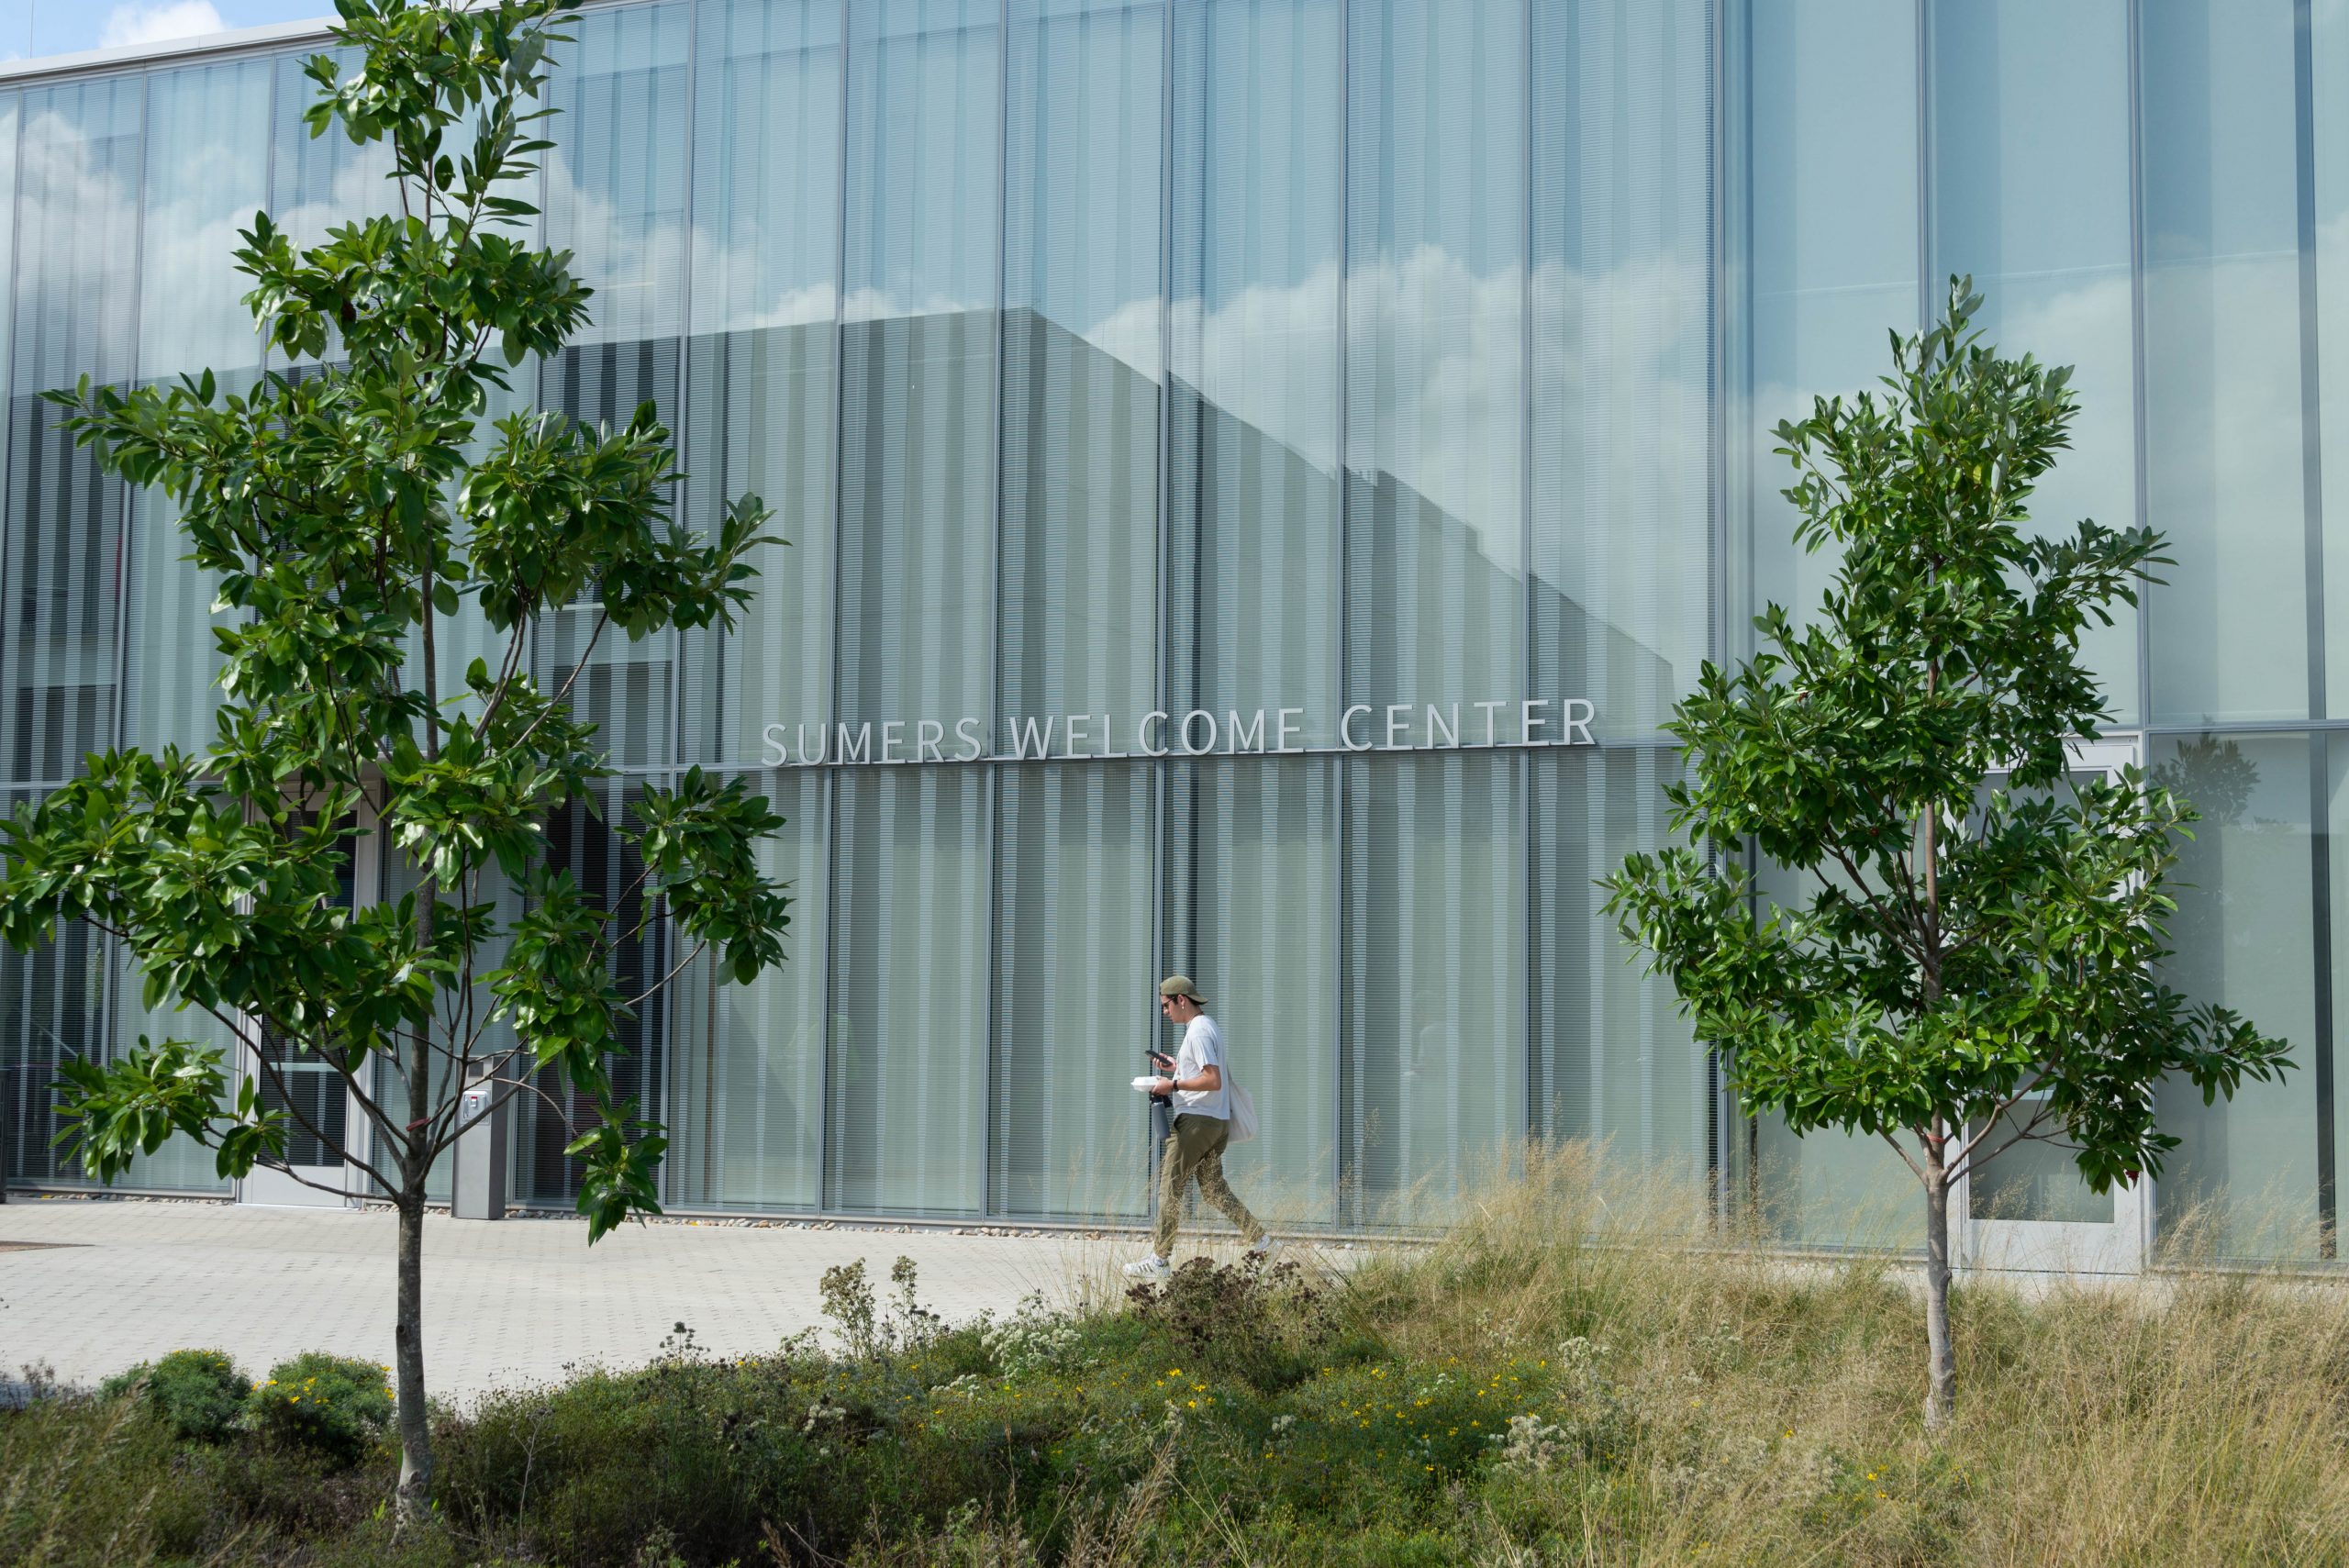 A person in a white shirt walks in front of a glass building framed by green trees.